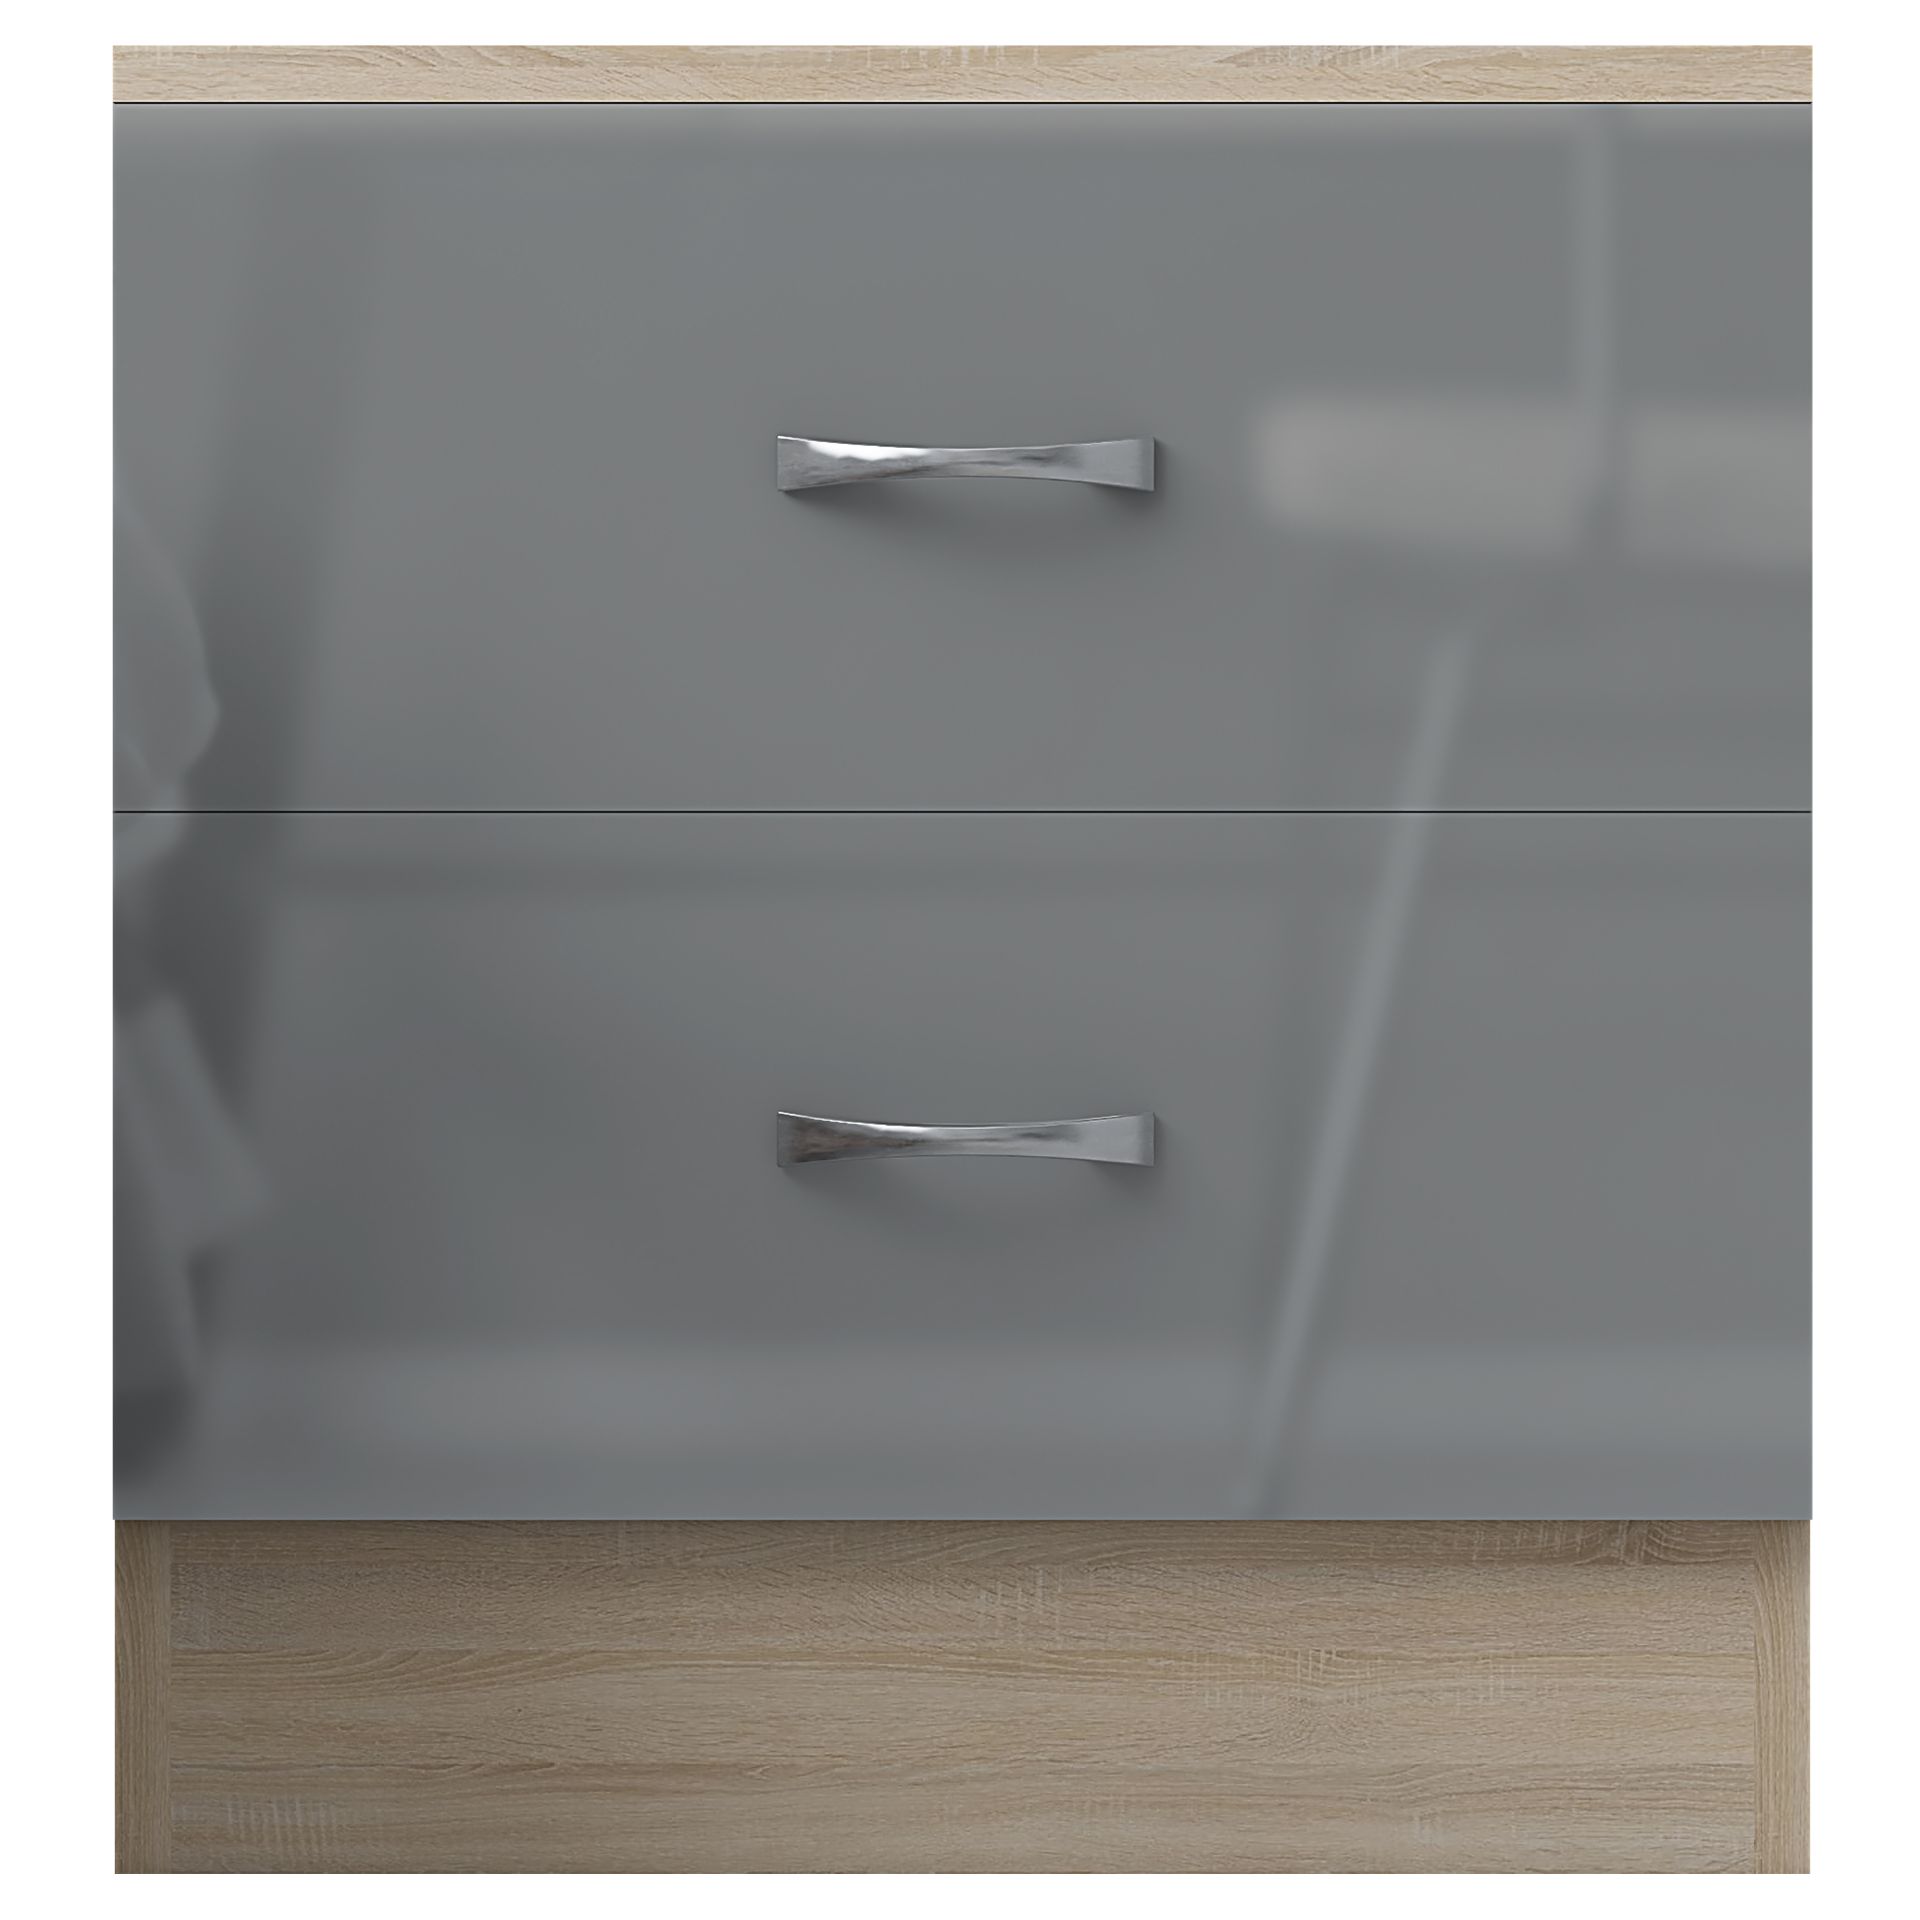 10 X NEW FLATPACKED HARMIN GREY HIGH GLOSS ON OAK FRAME 2 DRAWER BEDSIDE CABINET TABLE - Image 4 of 8